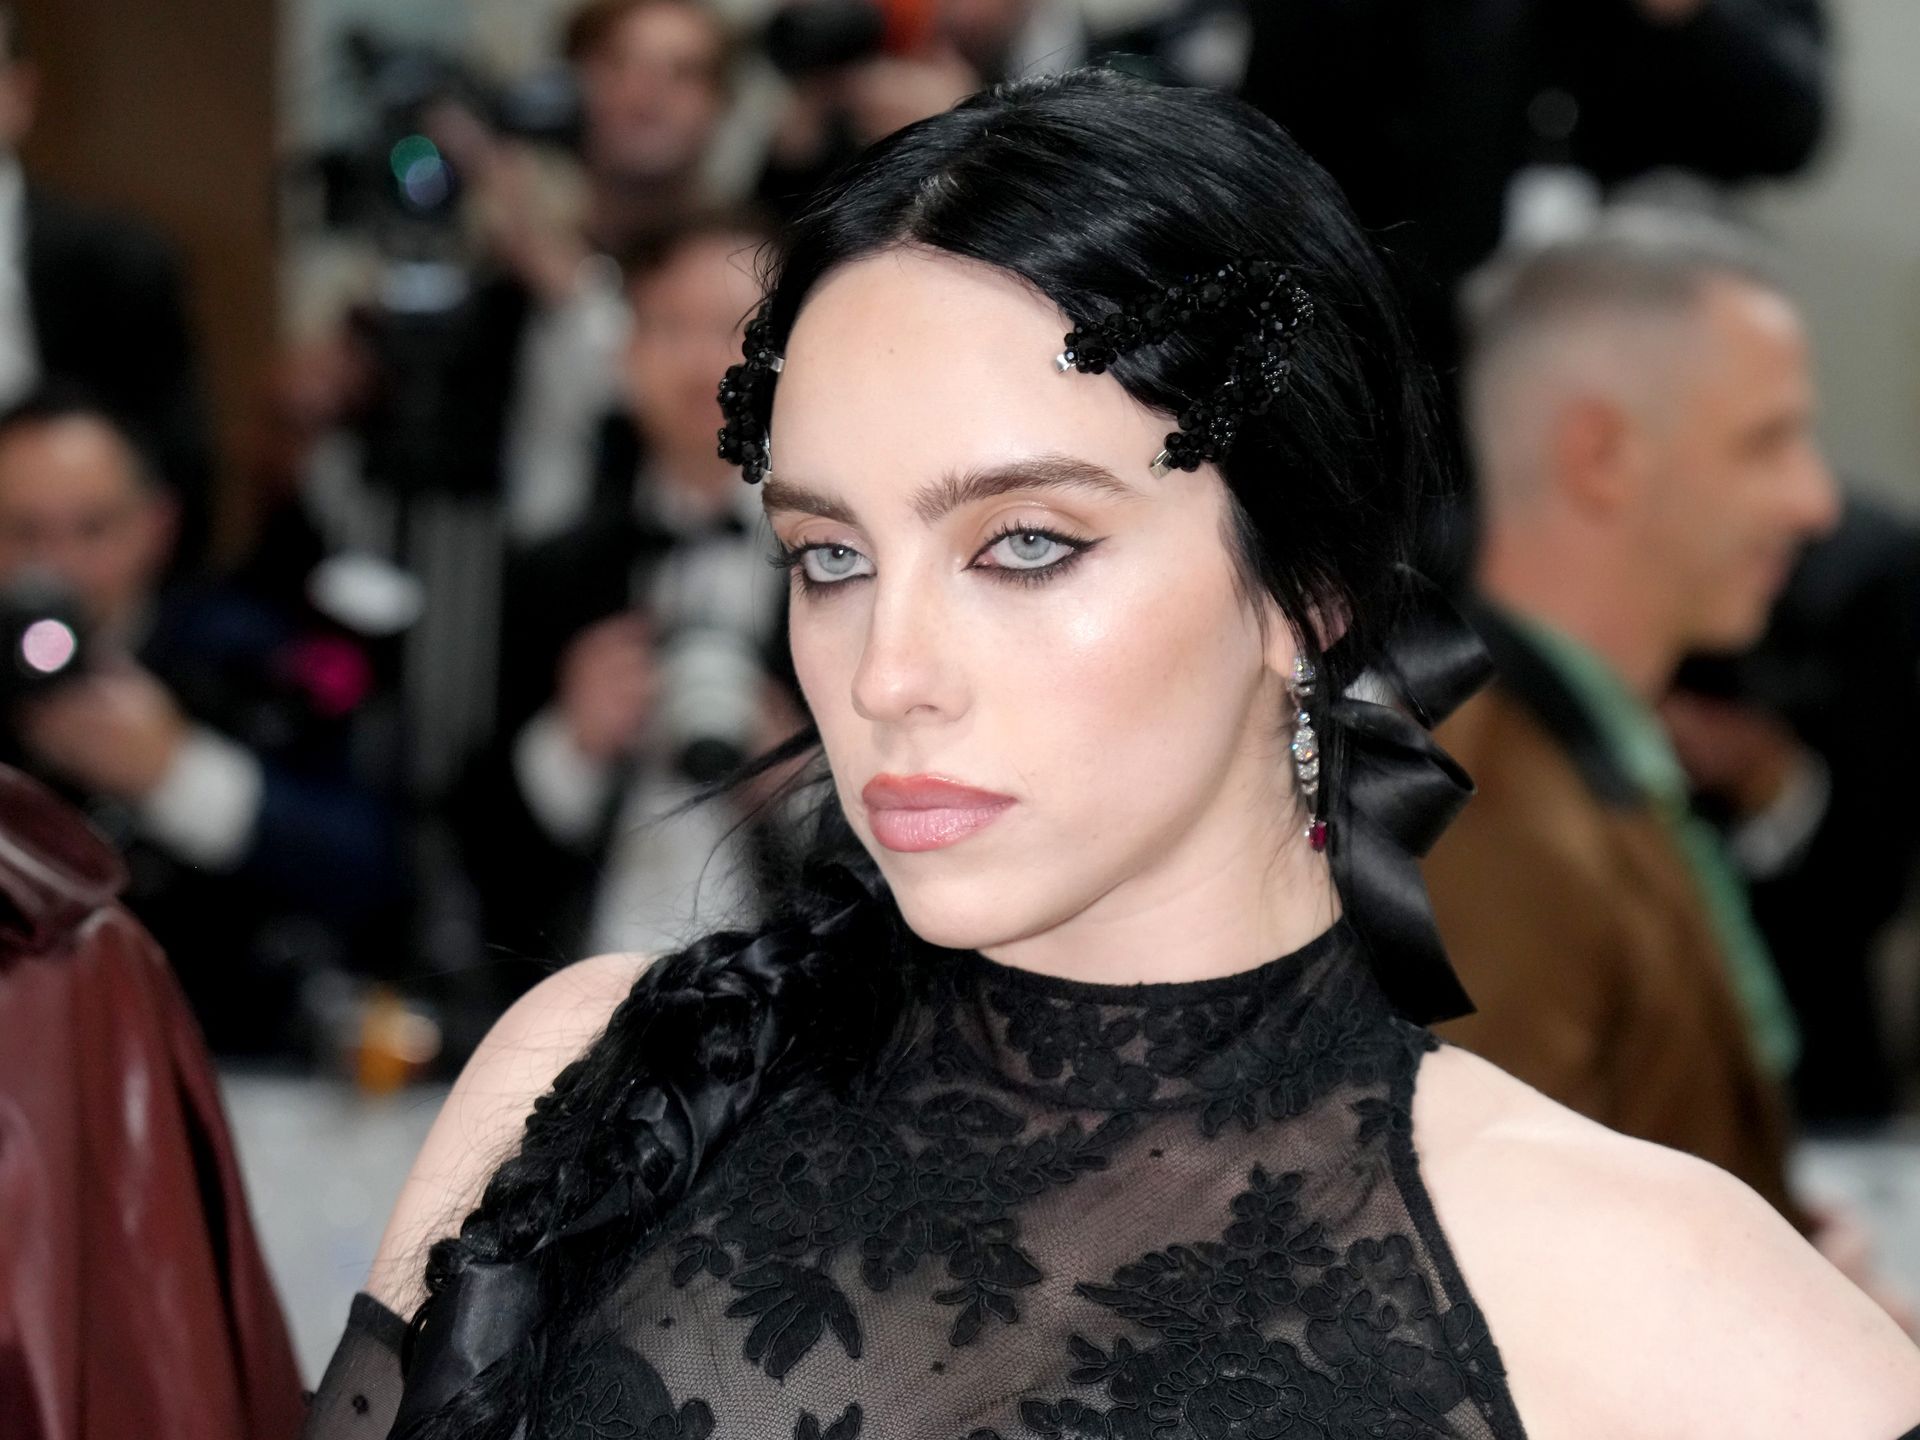 Billie Eilish Makes History as the Youngest Person to Win 2 Oscars